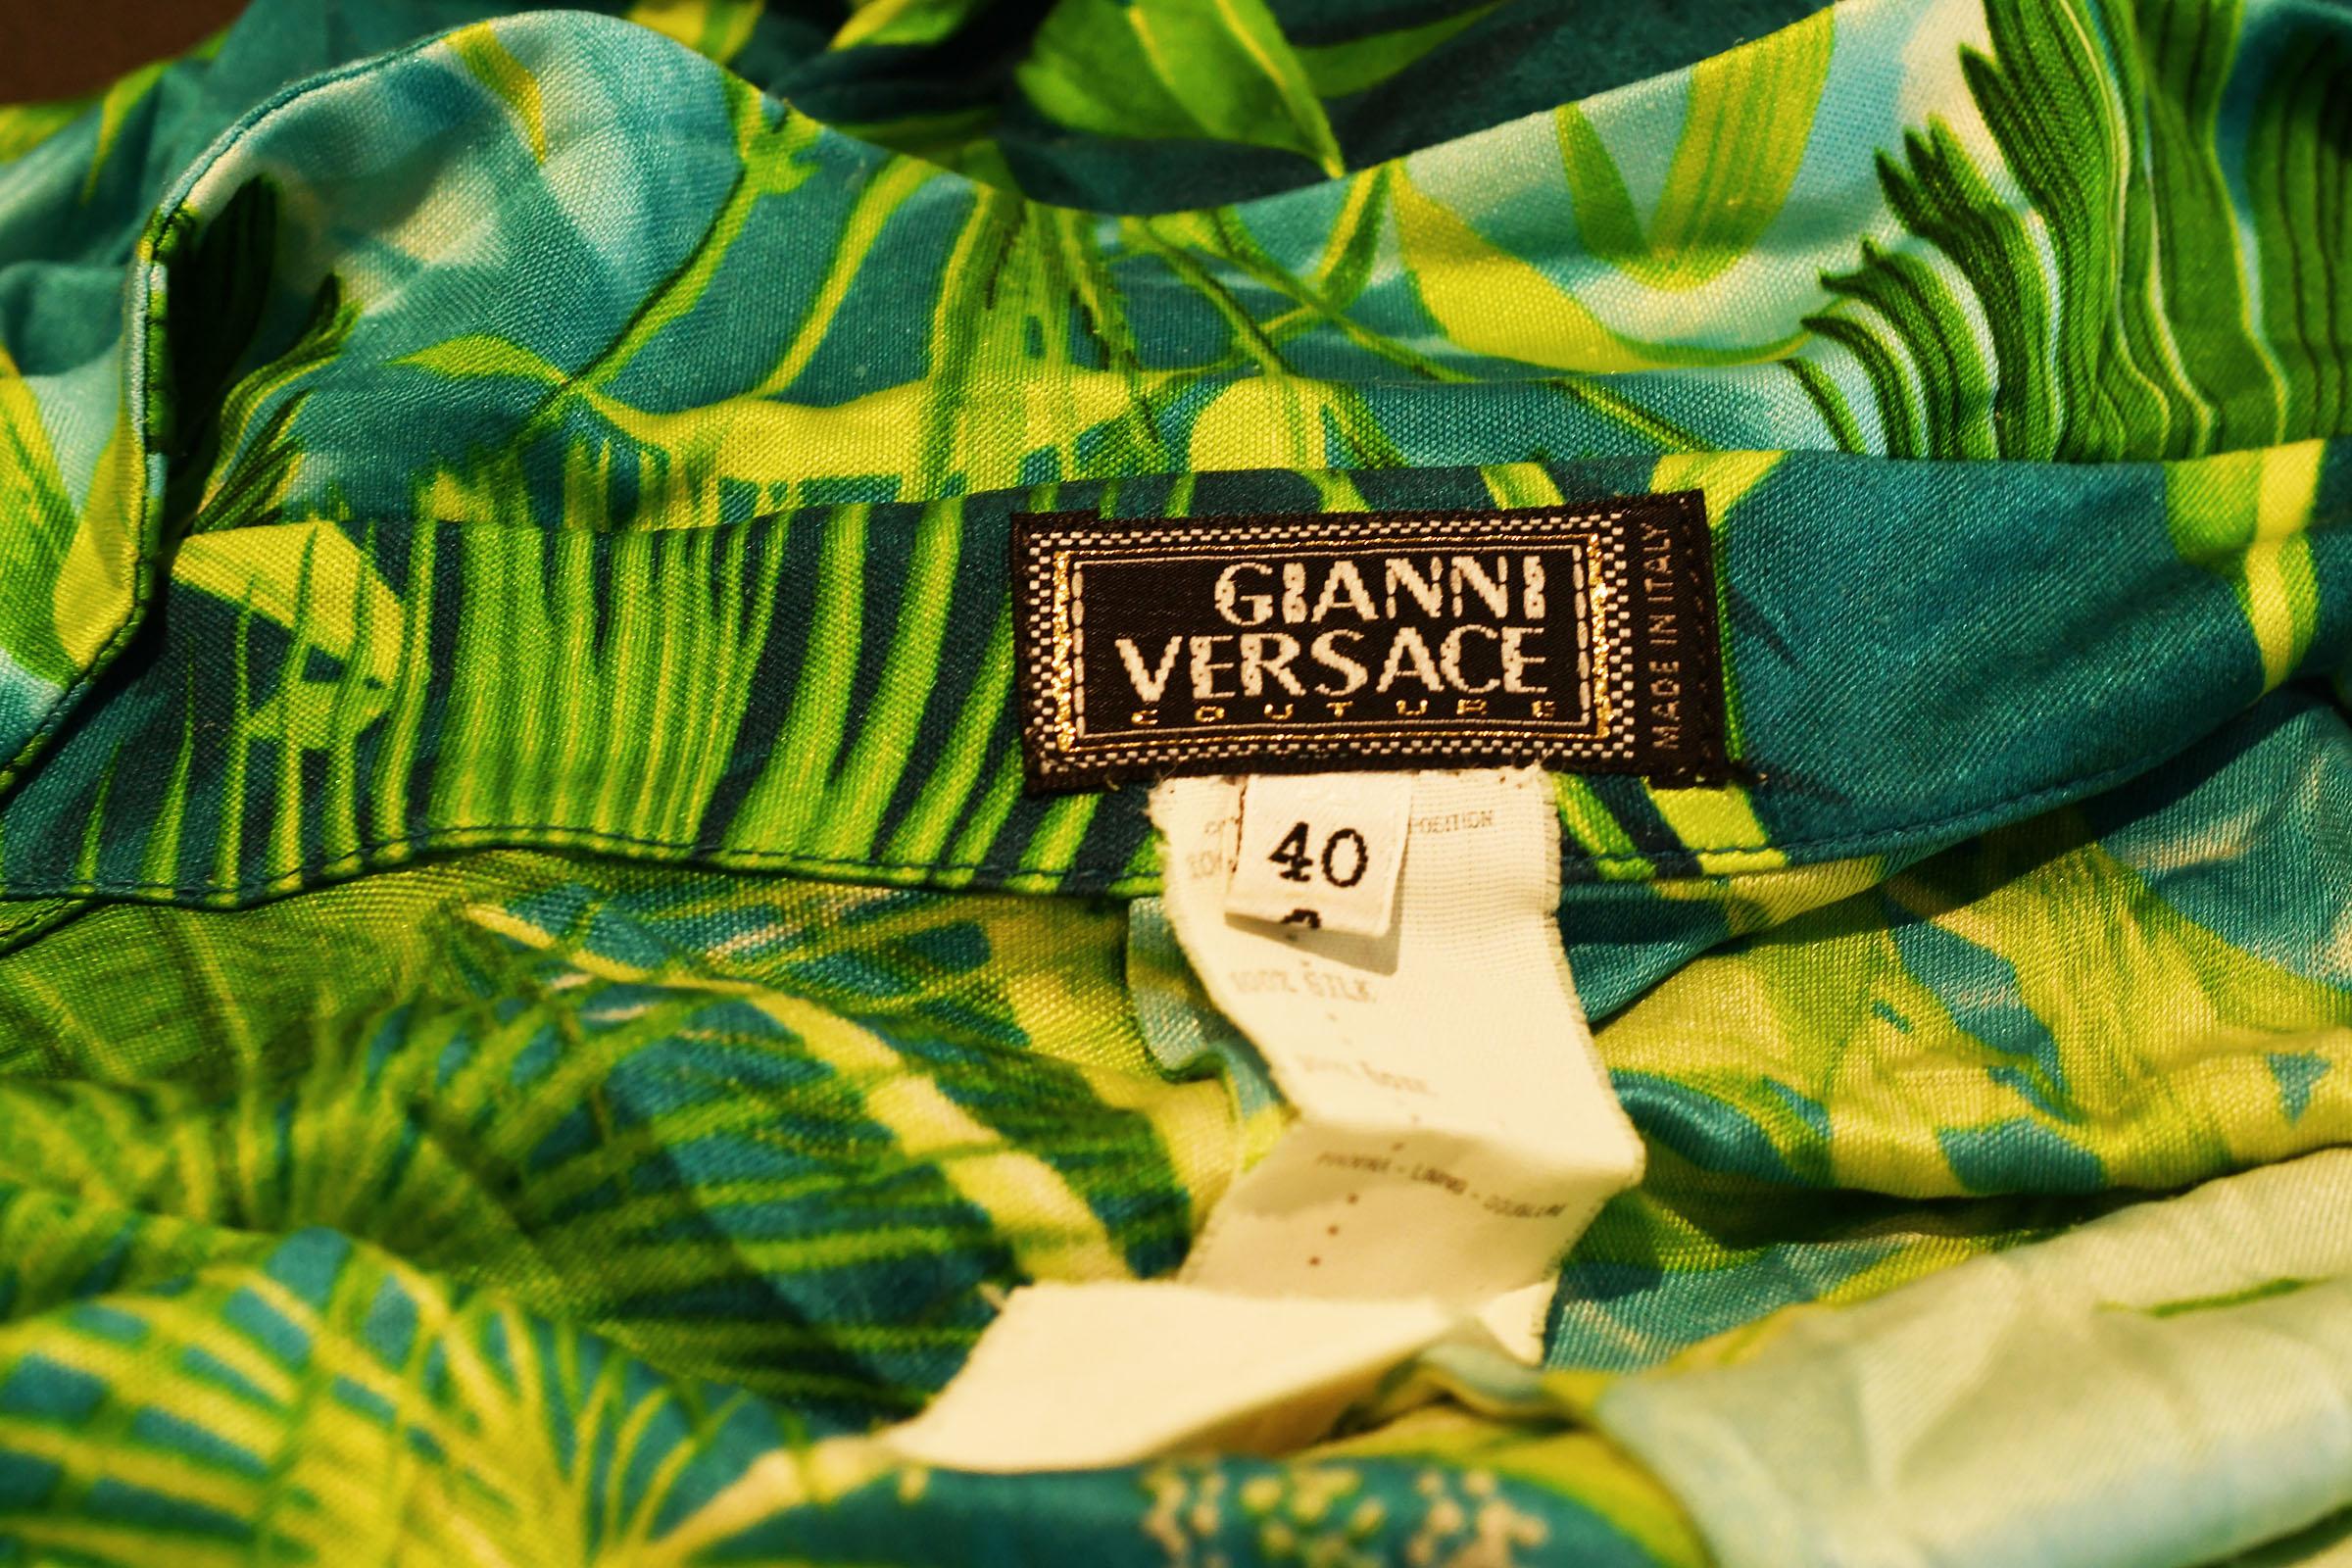 Women's Iconic Gianni Versace Couture Tropical Print Dress - Size IT 40 For Sale